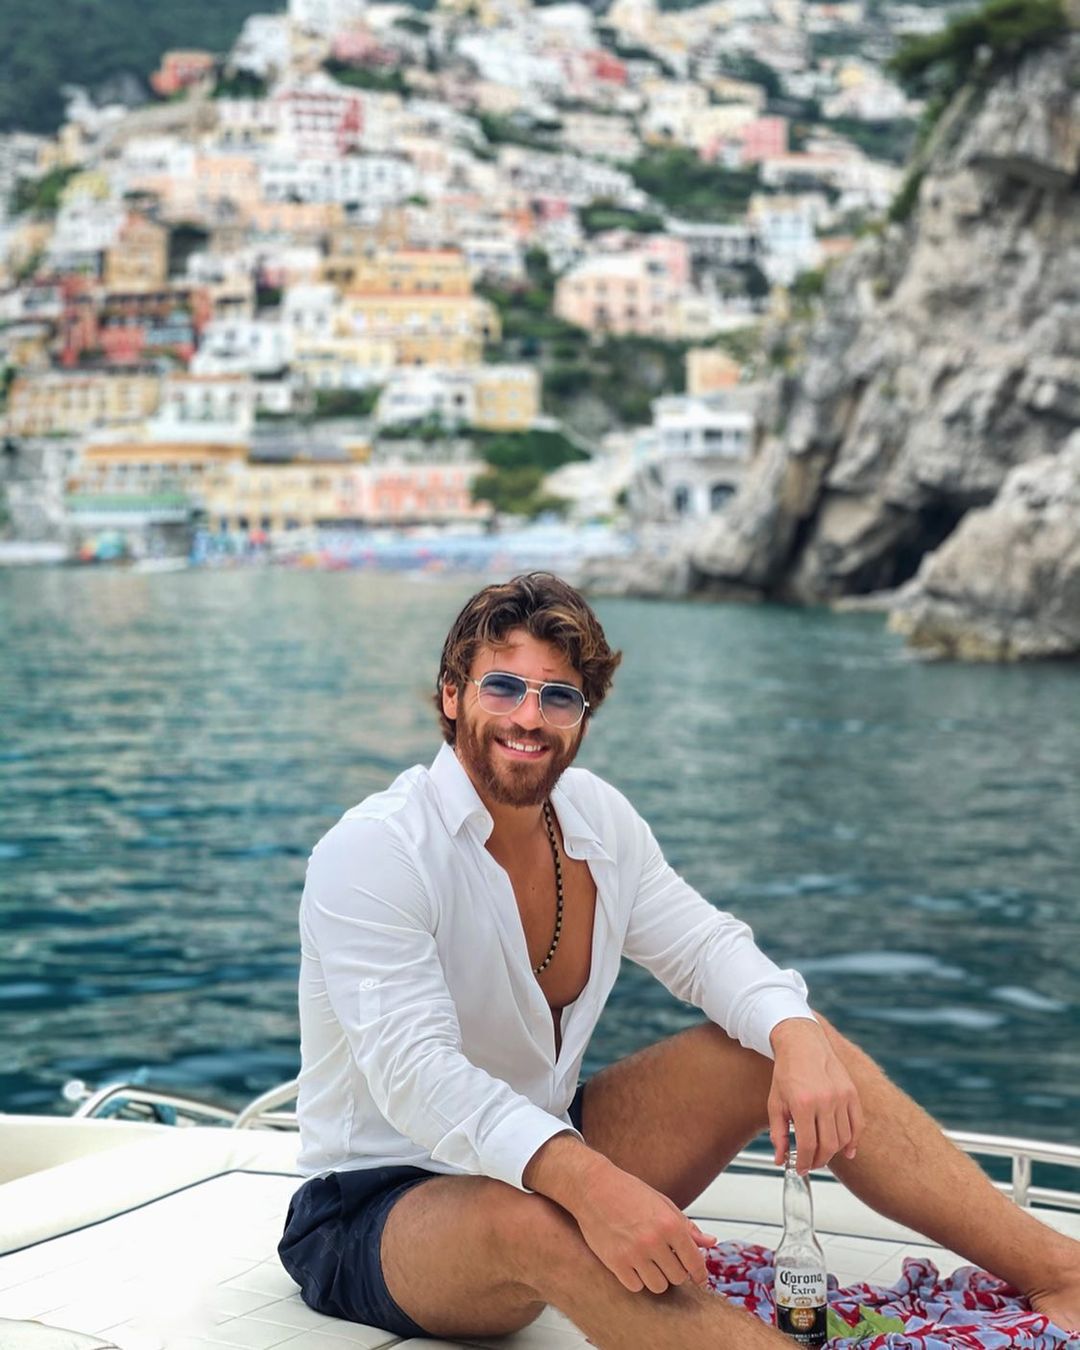 Can Yaman in white shirt enjoying on a boat